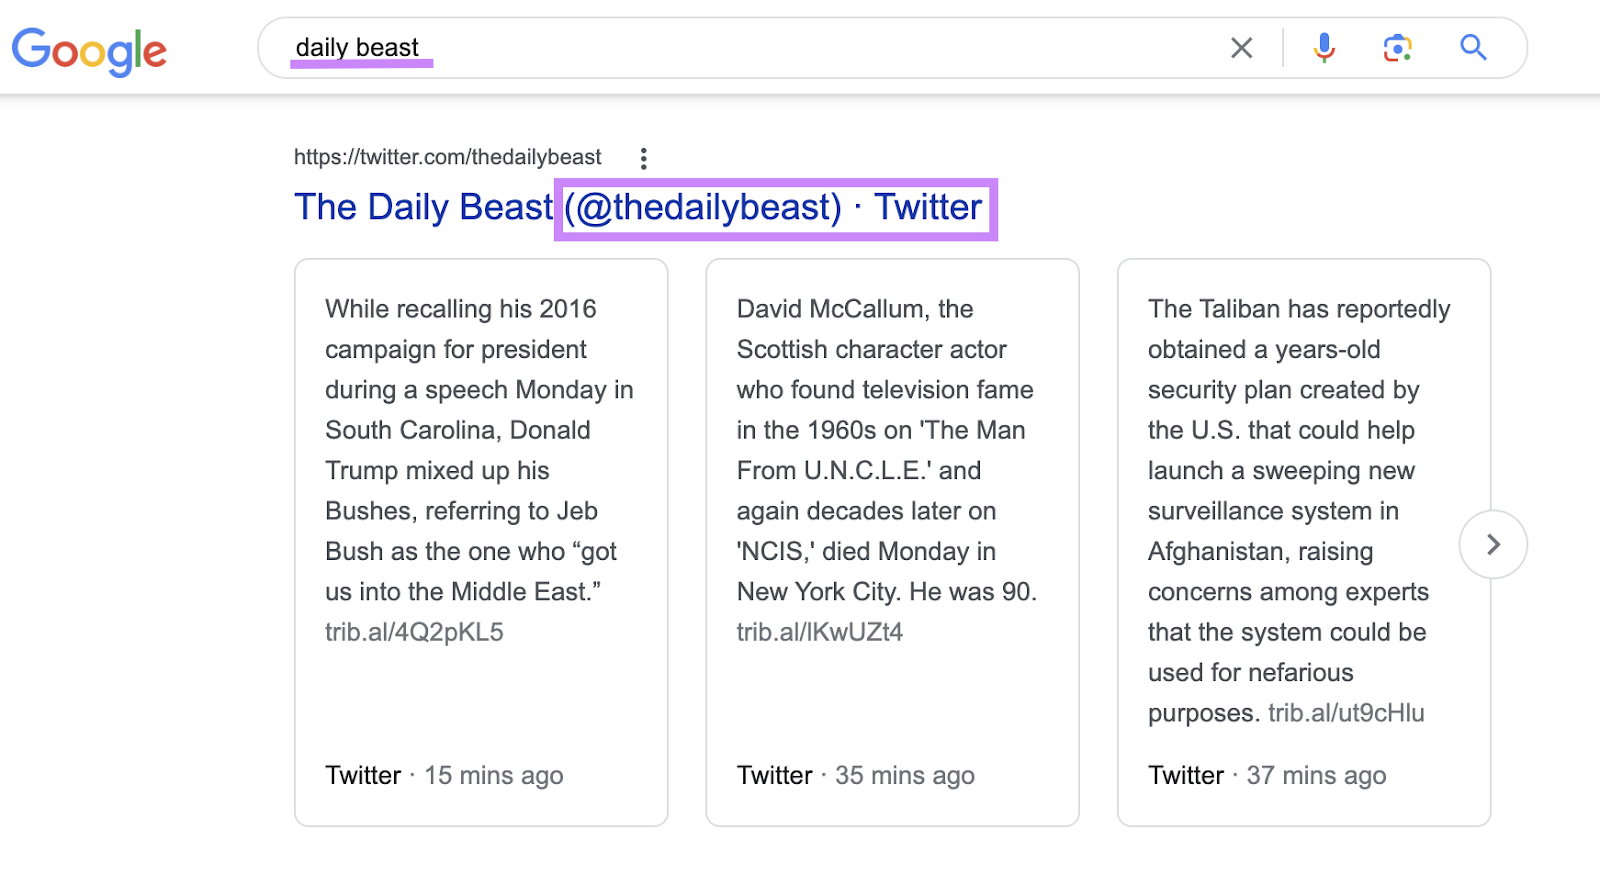 An example of Twitter-specific SERP feature